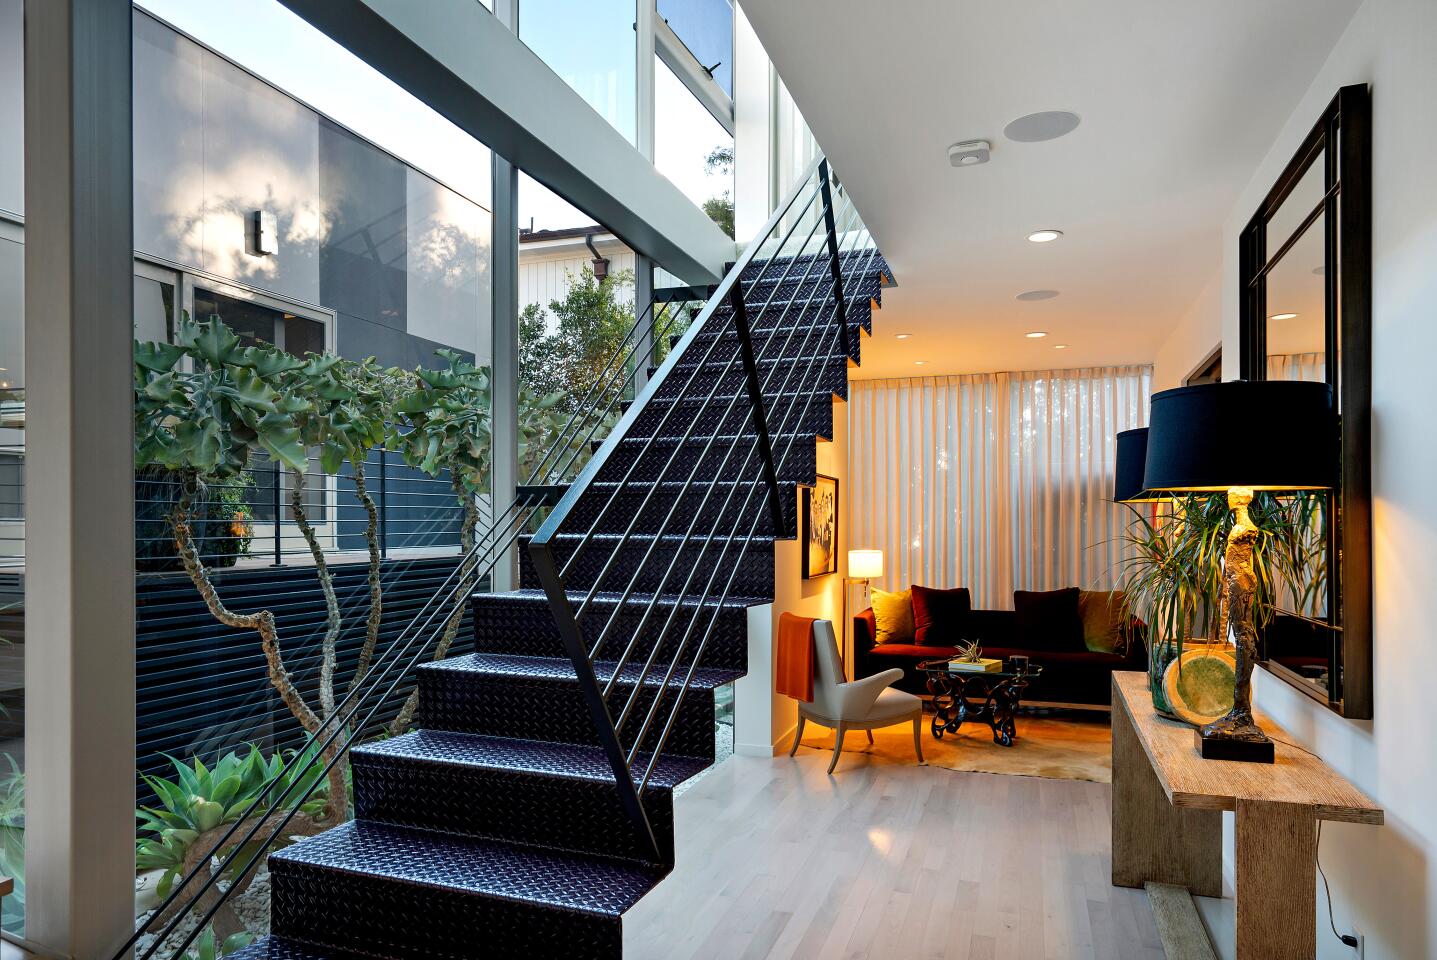 Stairs leading up next to glass walls and a furnished room down the hall.